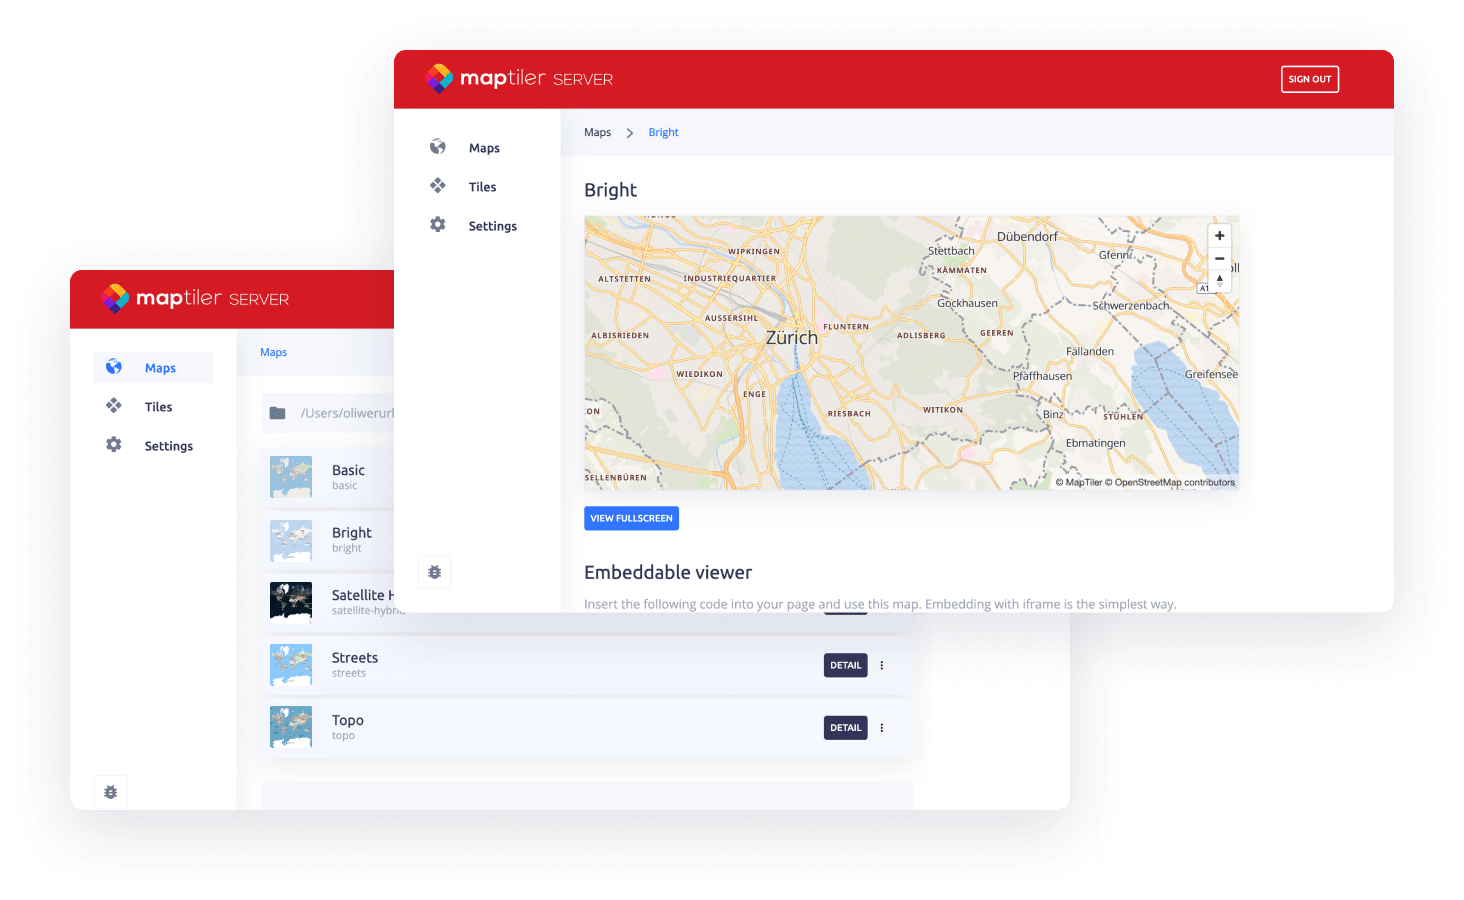 MapTiler Server interface with a map